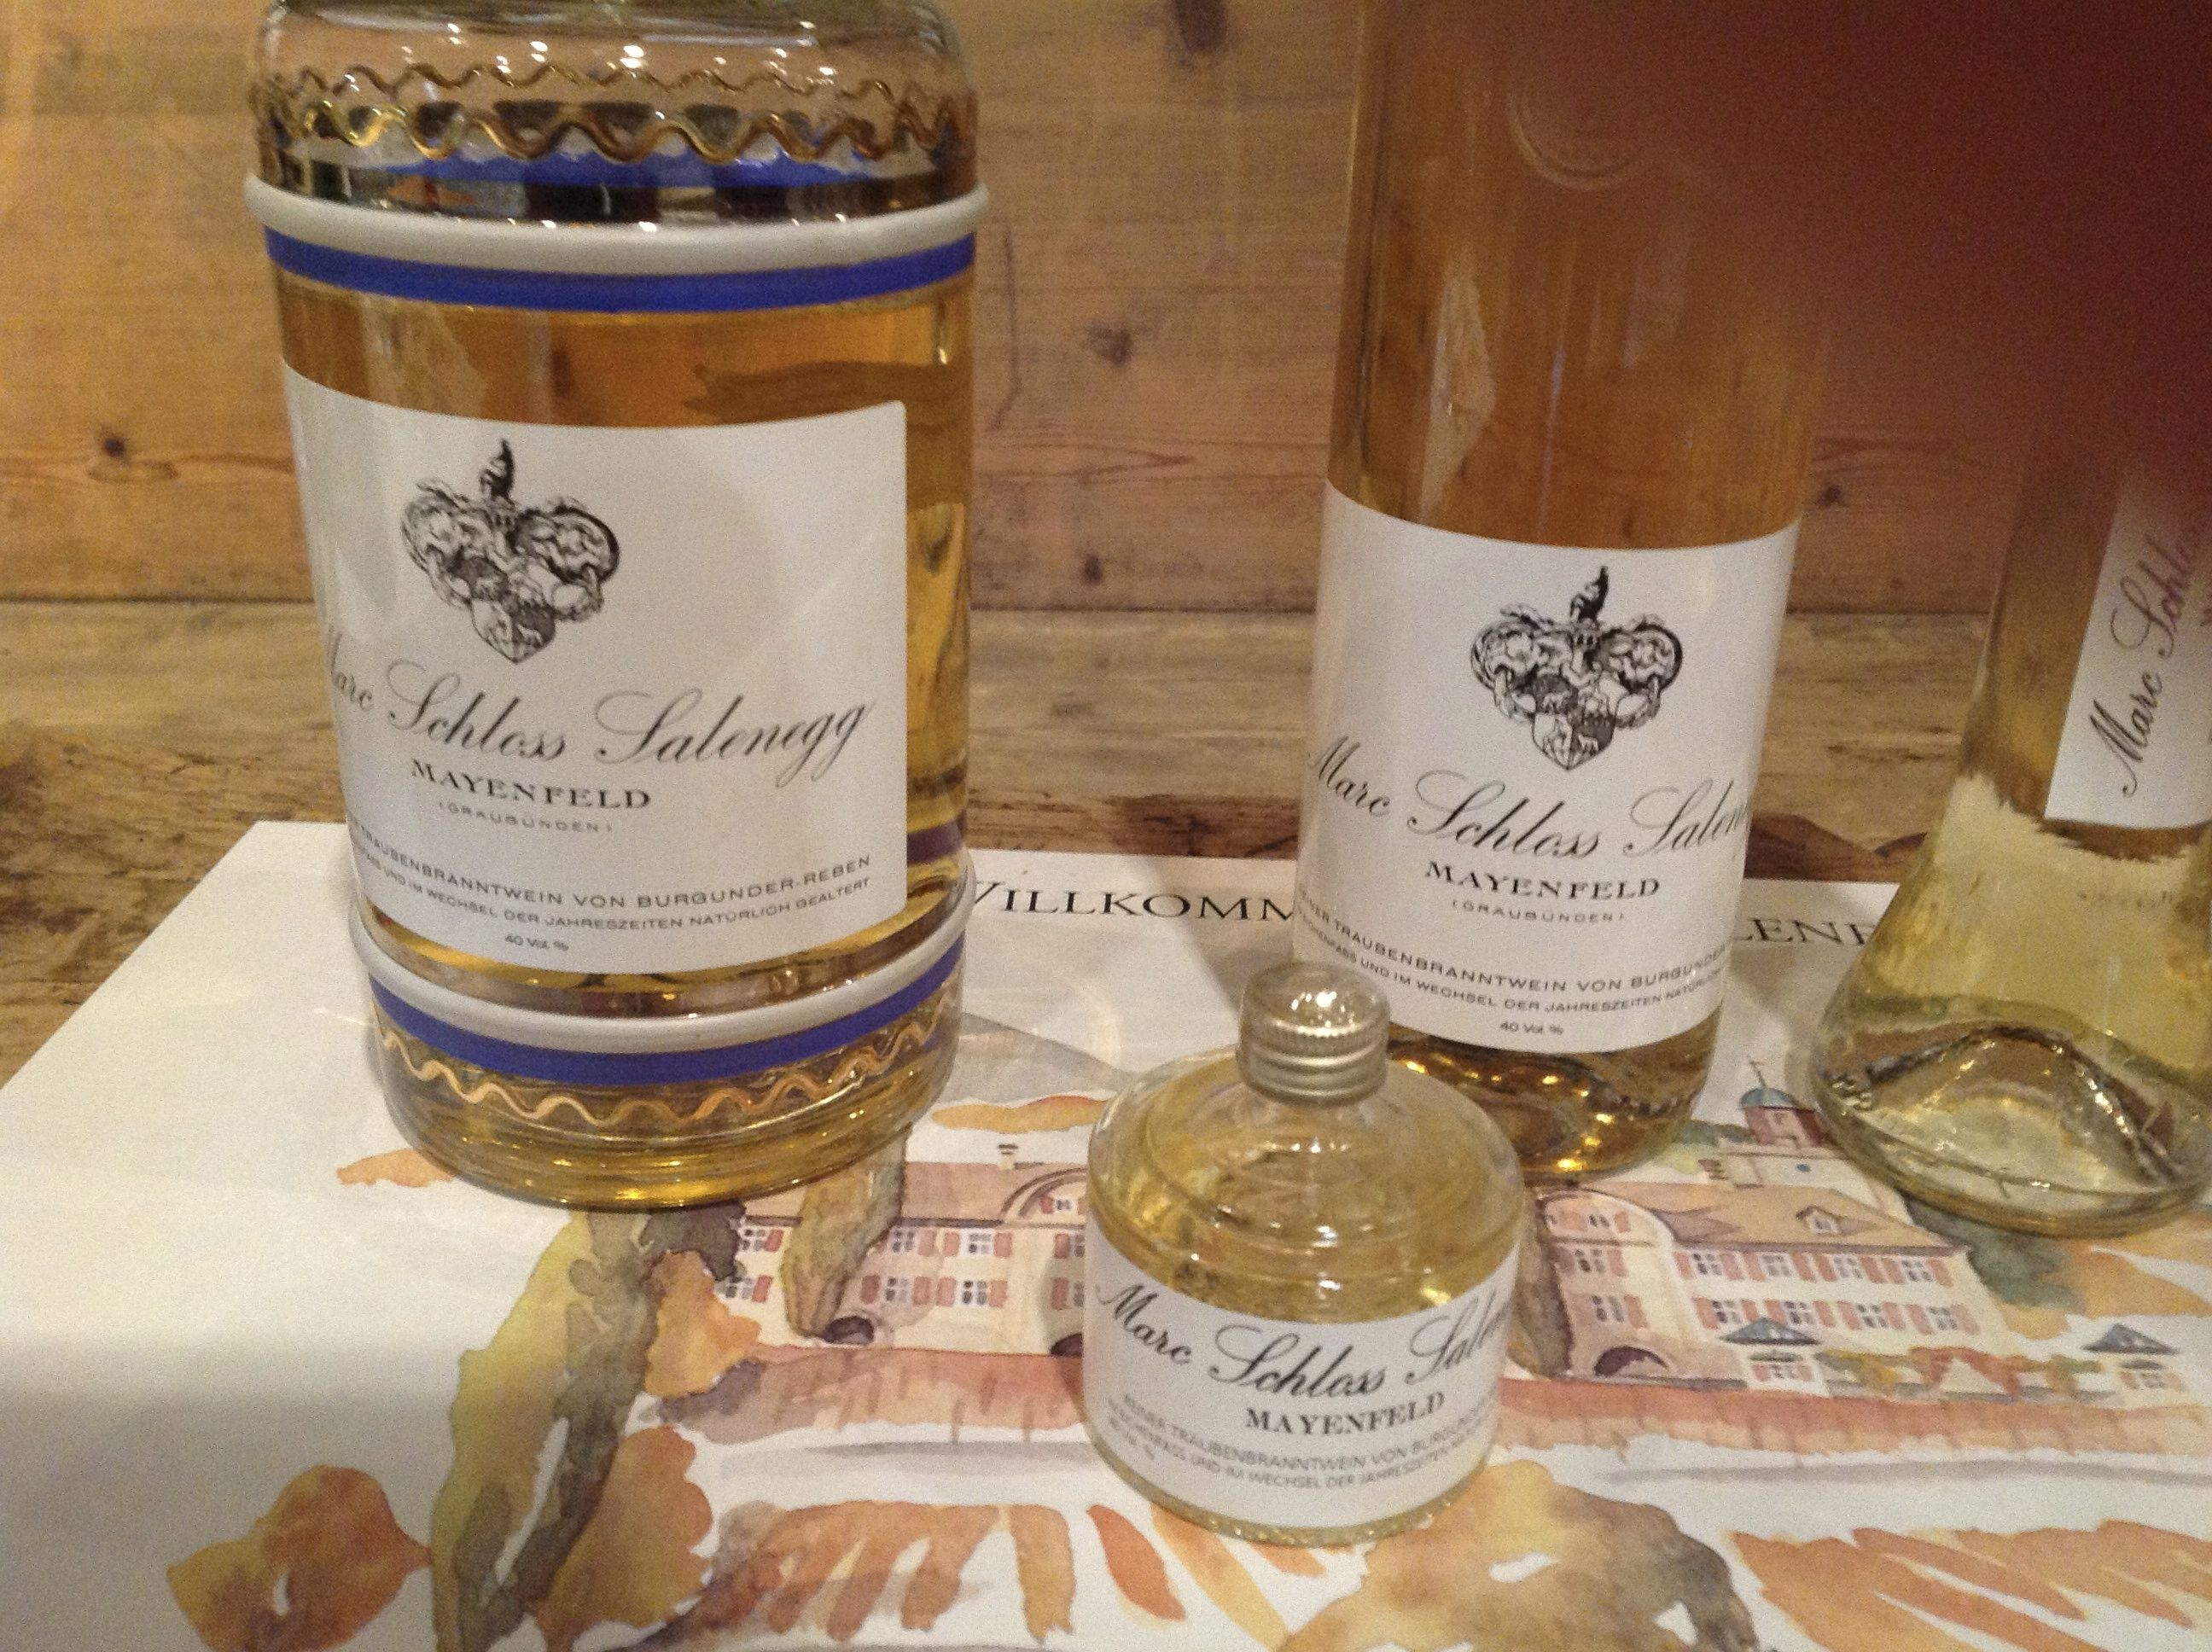 Schloss Salenegg products including marc, verjus and essig (Photo P. Hunt 2013)